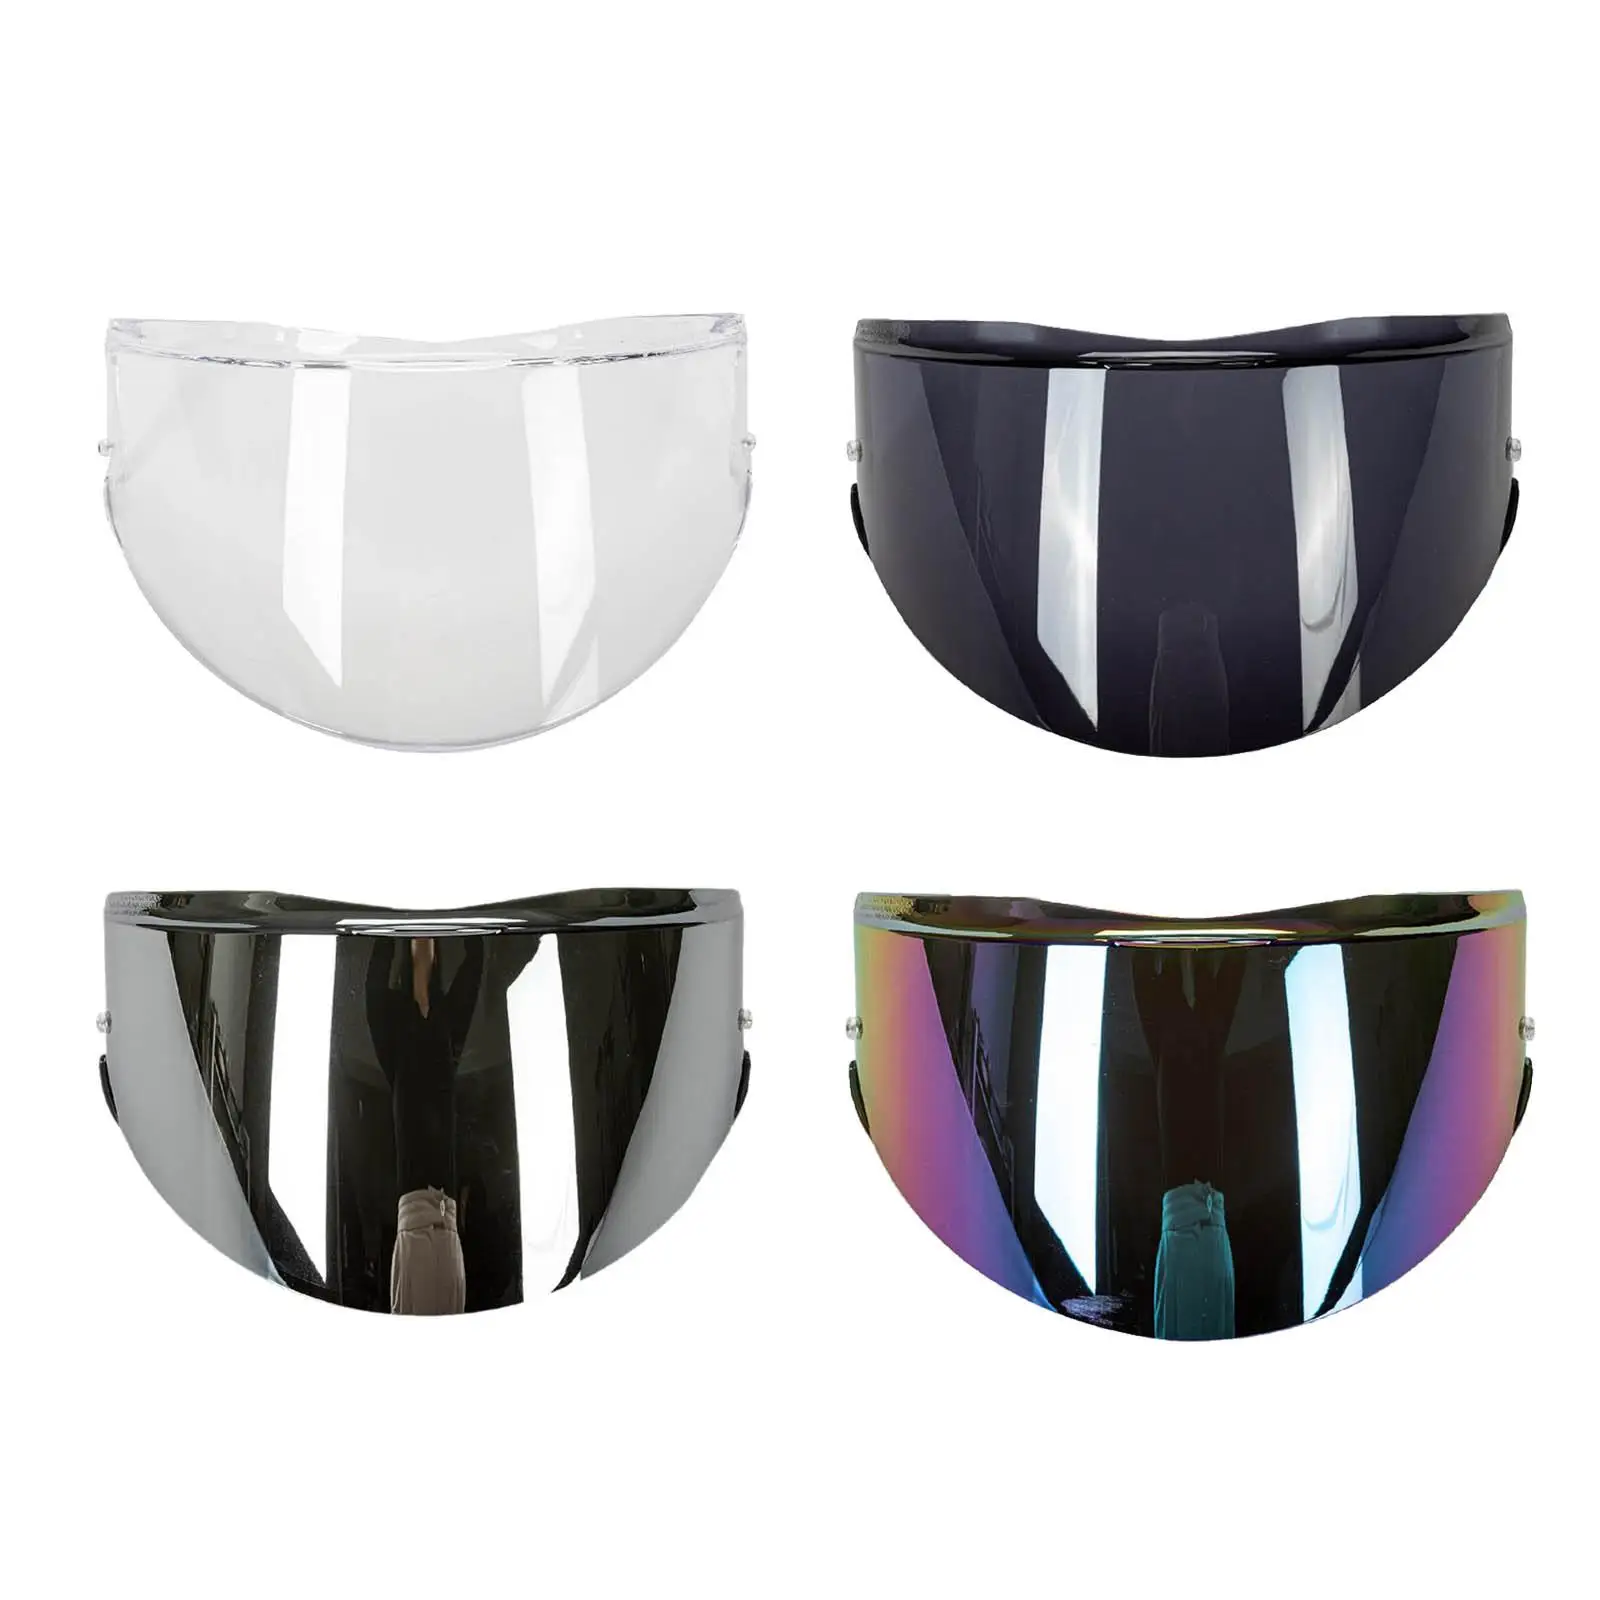 

Motorcycle Helmet Lens Visor Shield Protective Cover Helmet Visor Replace Parts for LS2 FF399 Cycle Supplies Strong Durable